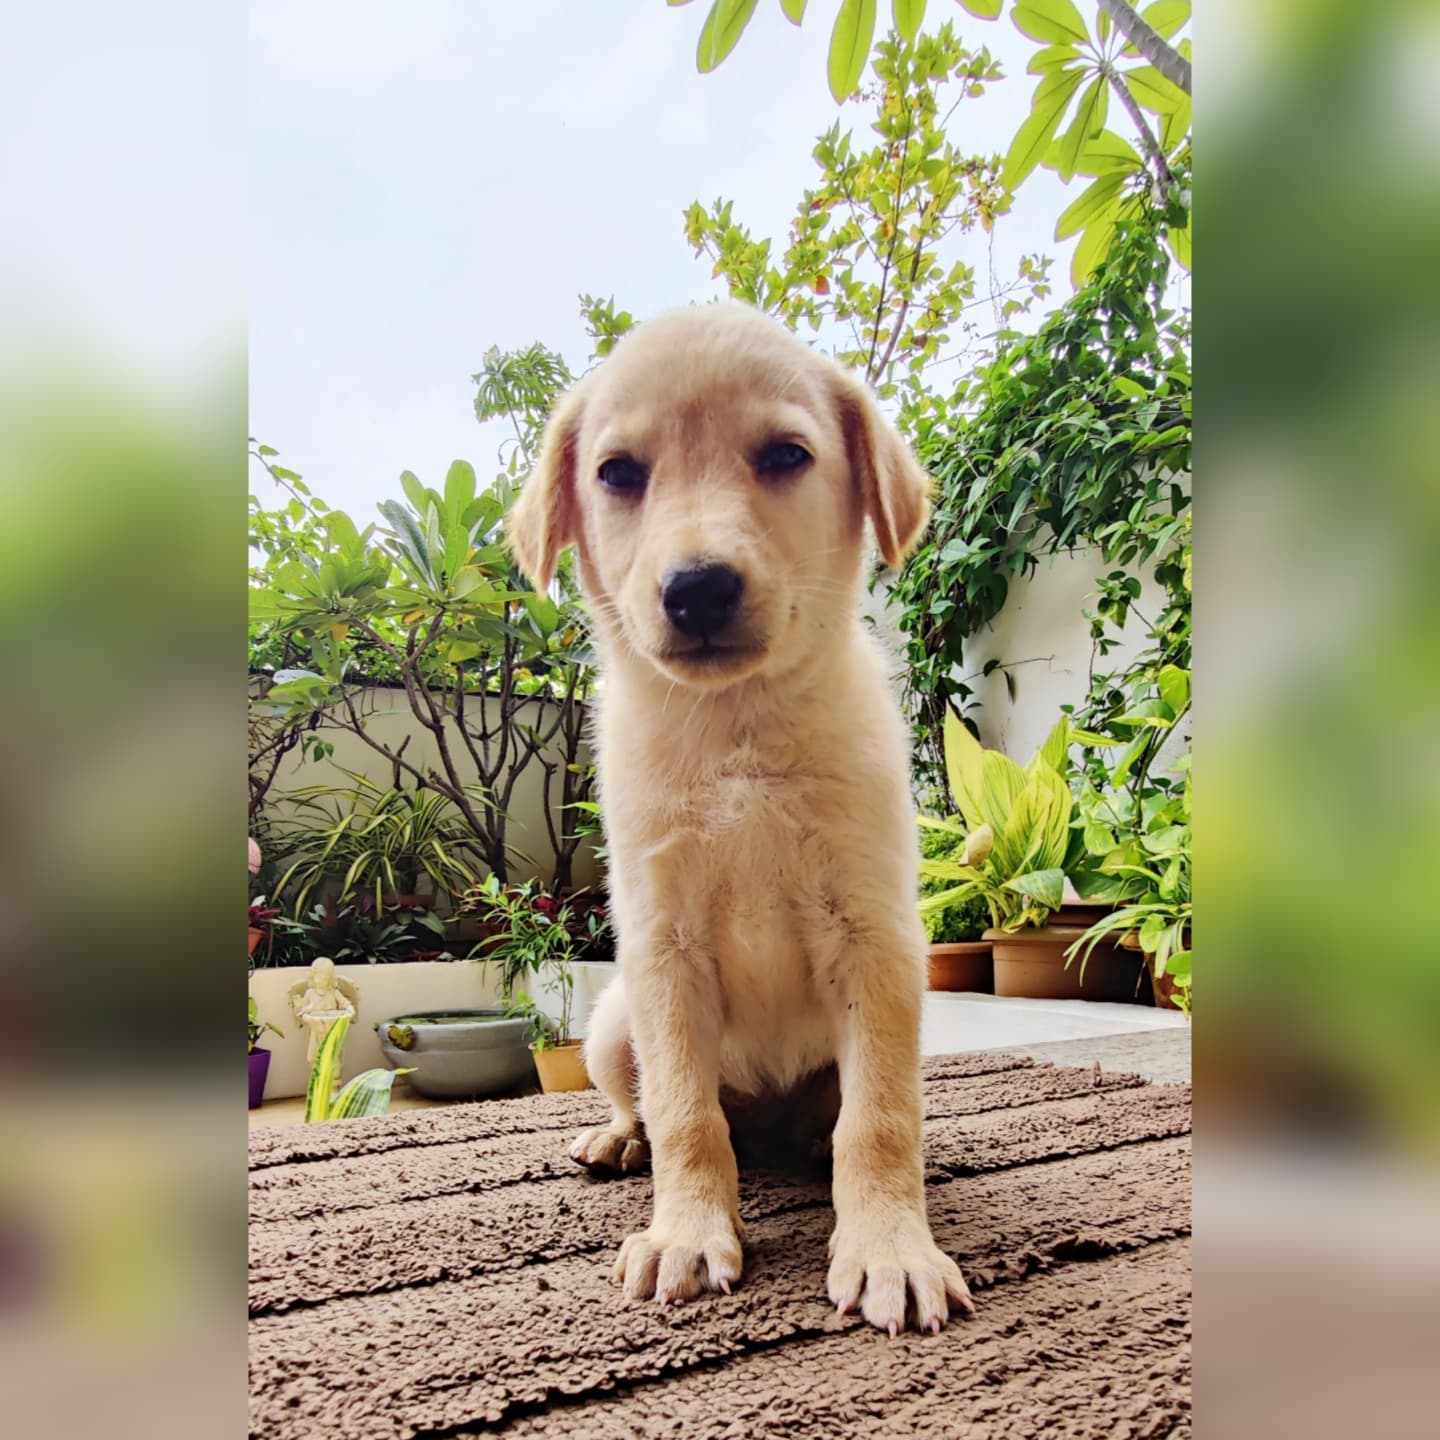 Butter (Indie Pup) Up for Adoption in Pune - Adopt Dog